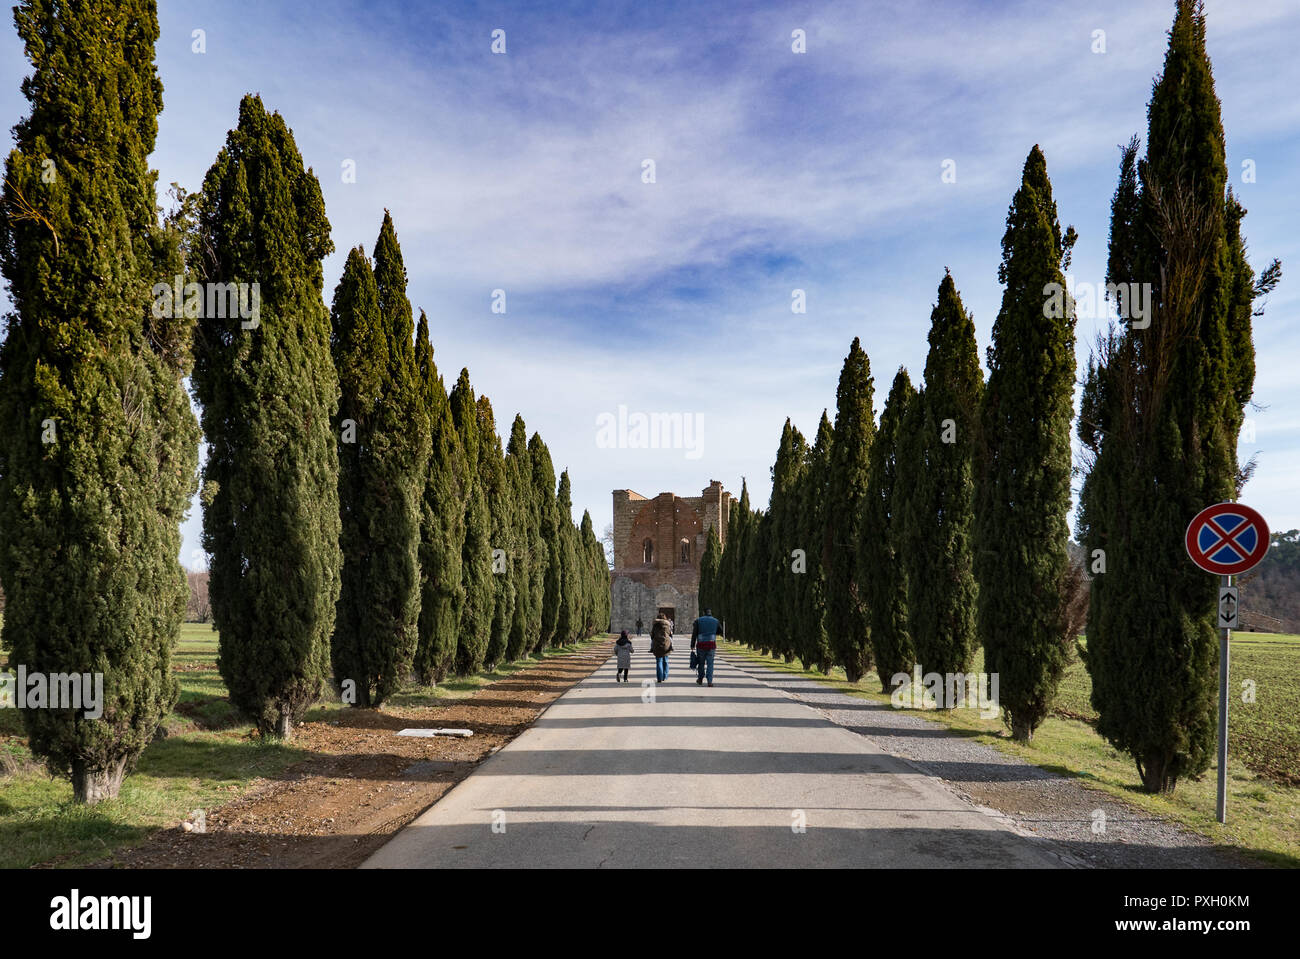 Tourists go to see the abbey of San Galgano, italy Stock Photo